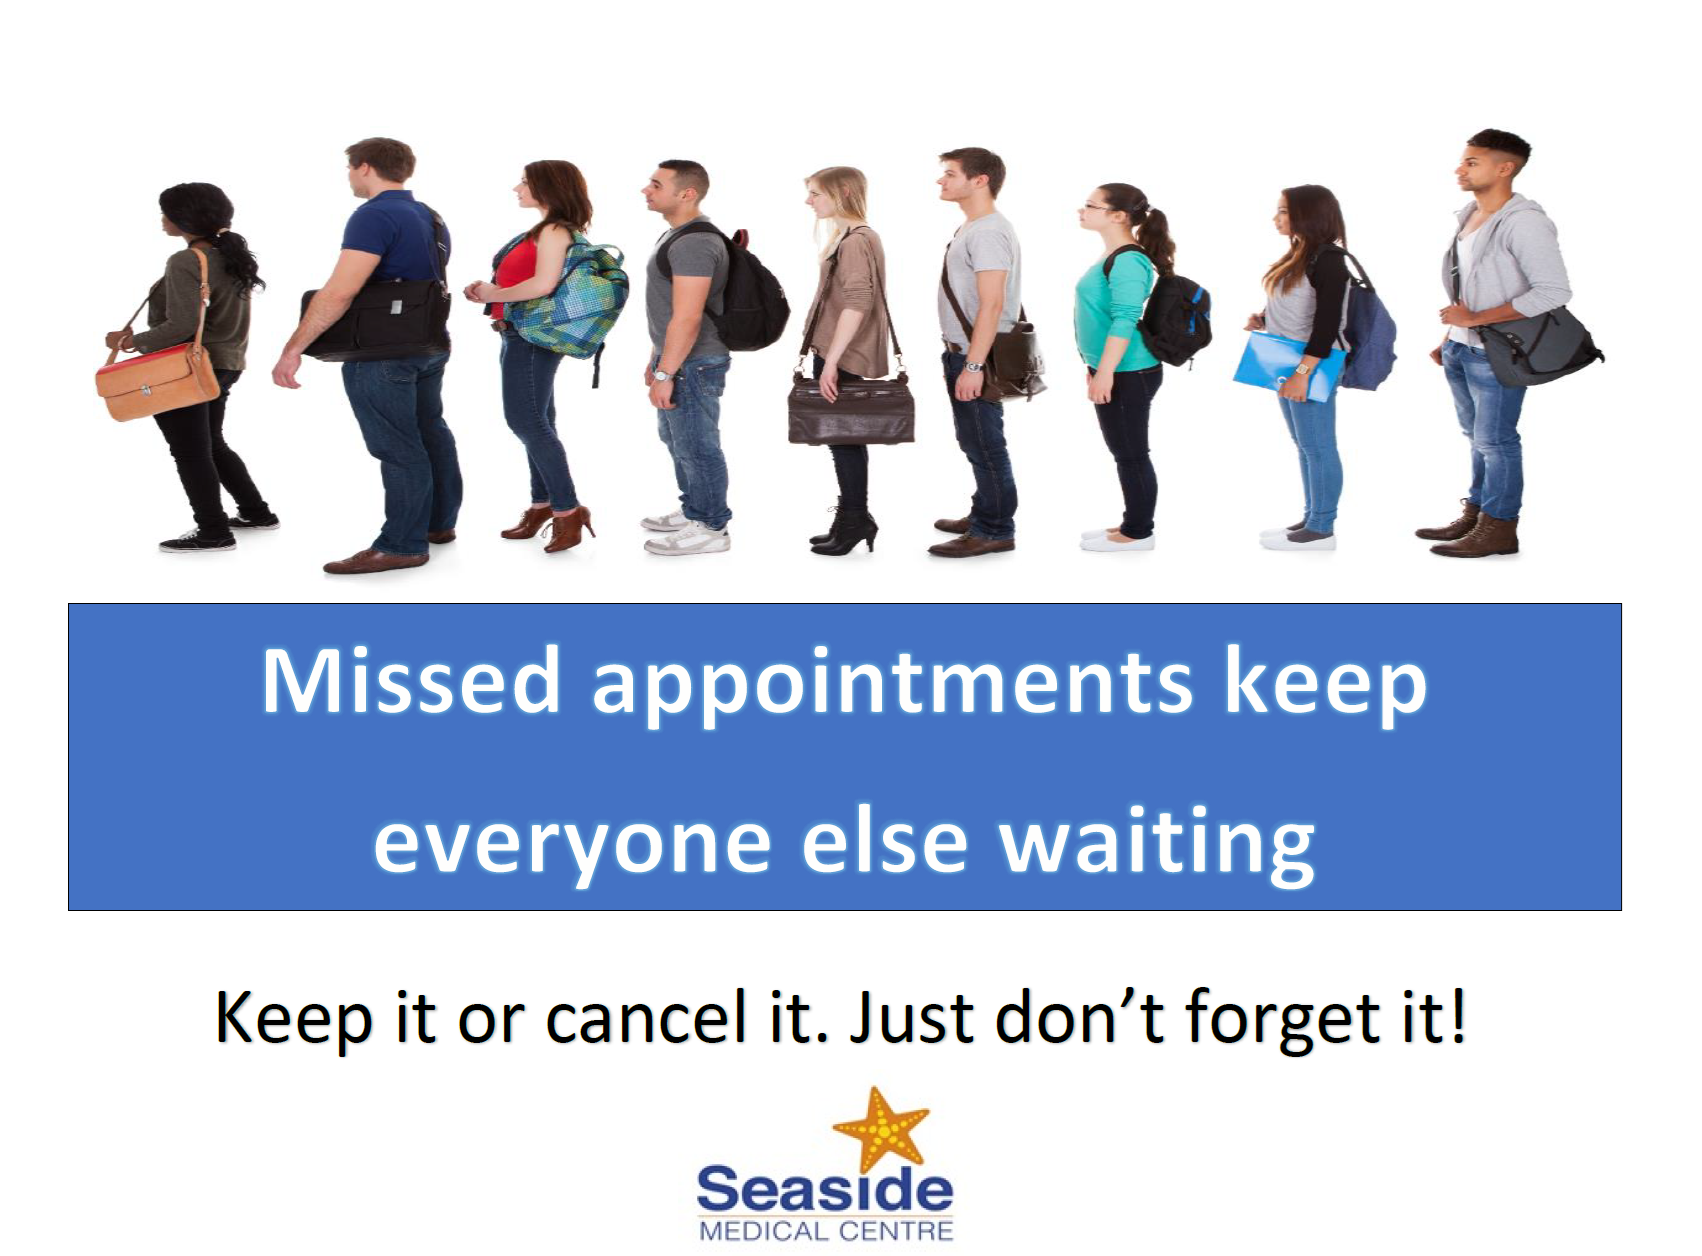 Missed appointments keep everyone waiting. Keep it or cancel it. Just don't forget it!